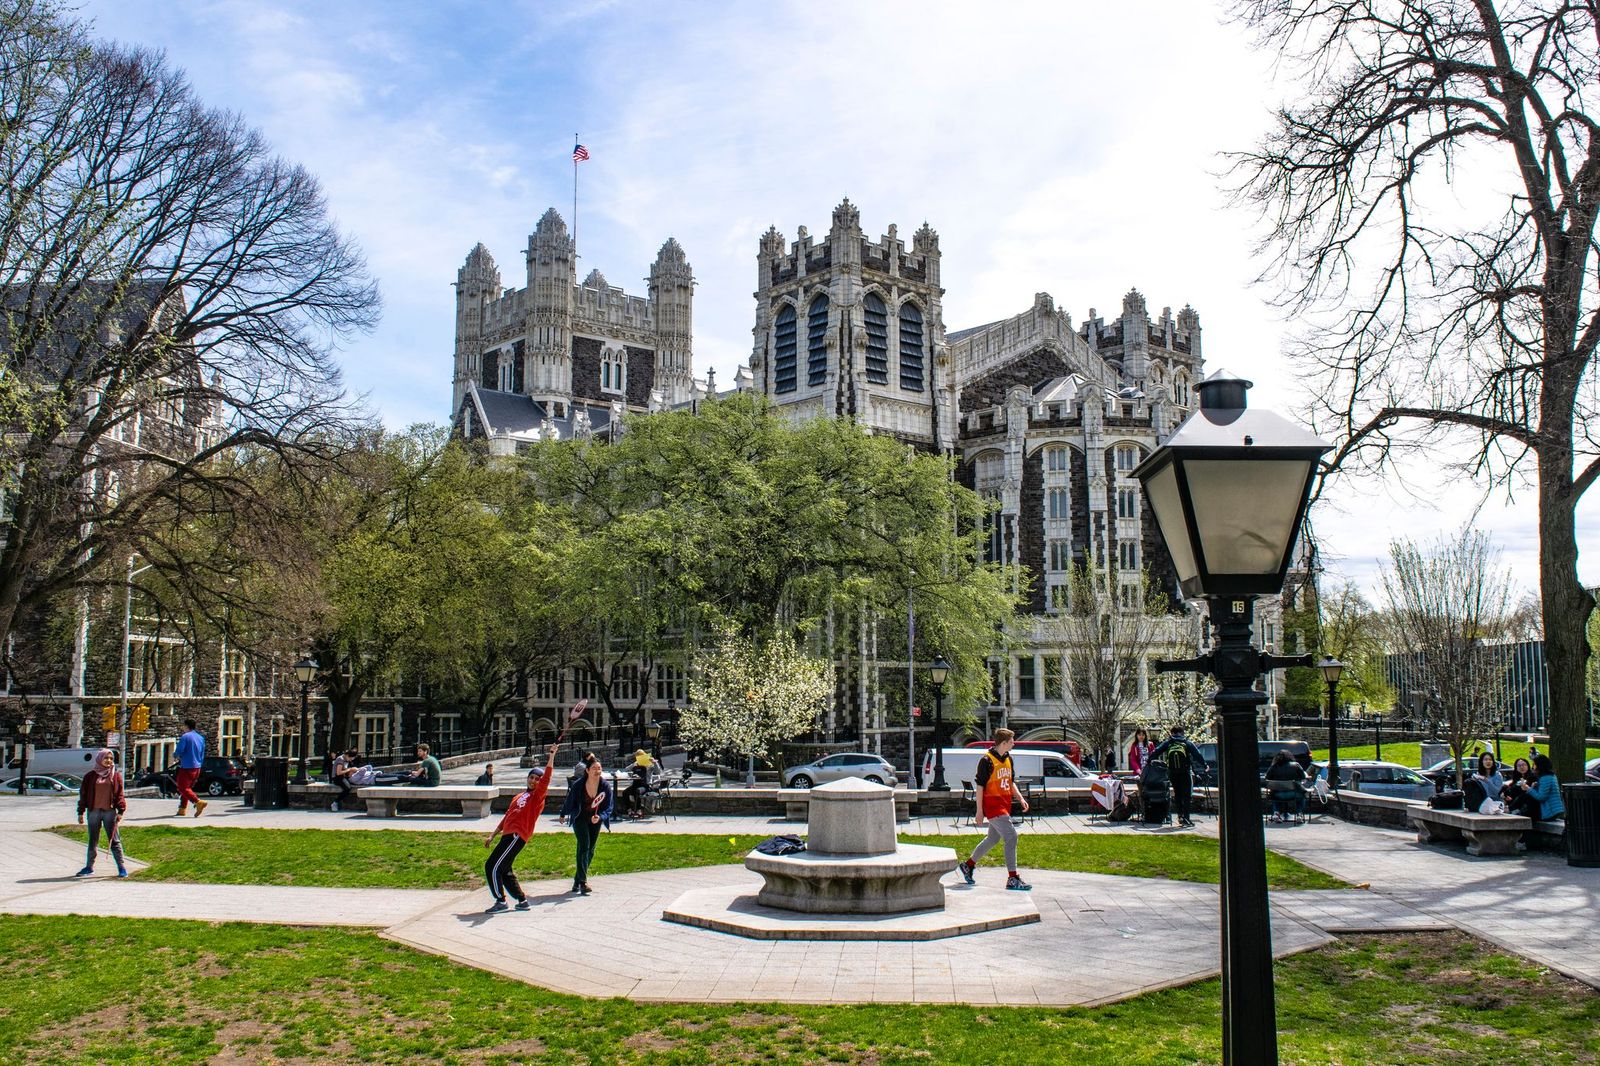 CCNY’s “Summer at City” program offers alluring courses The City